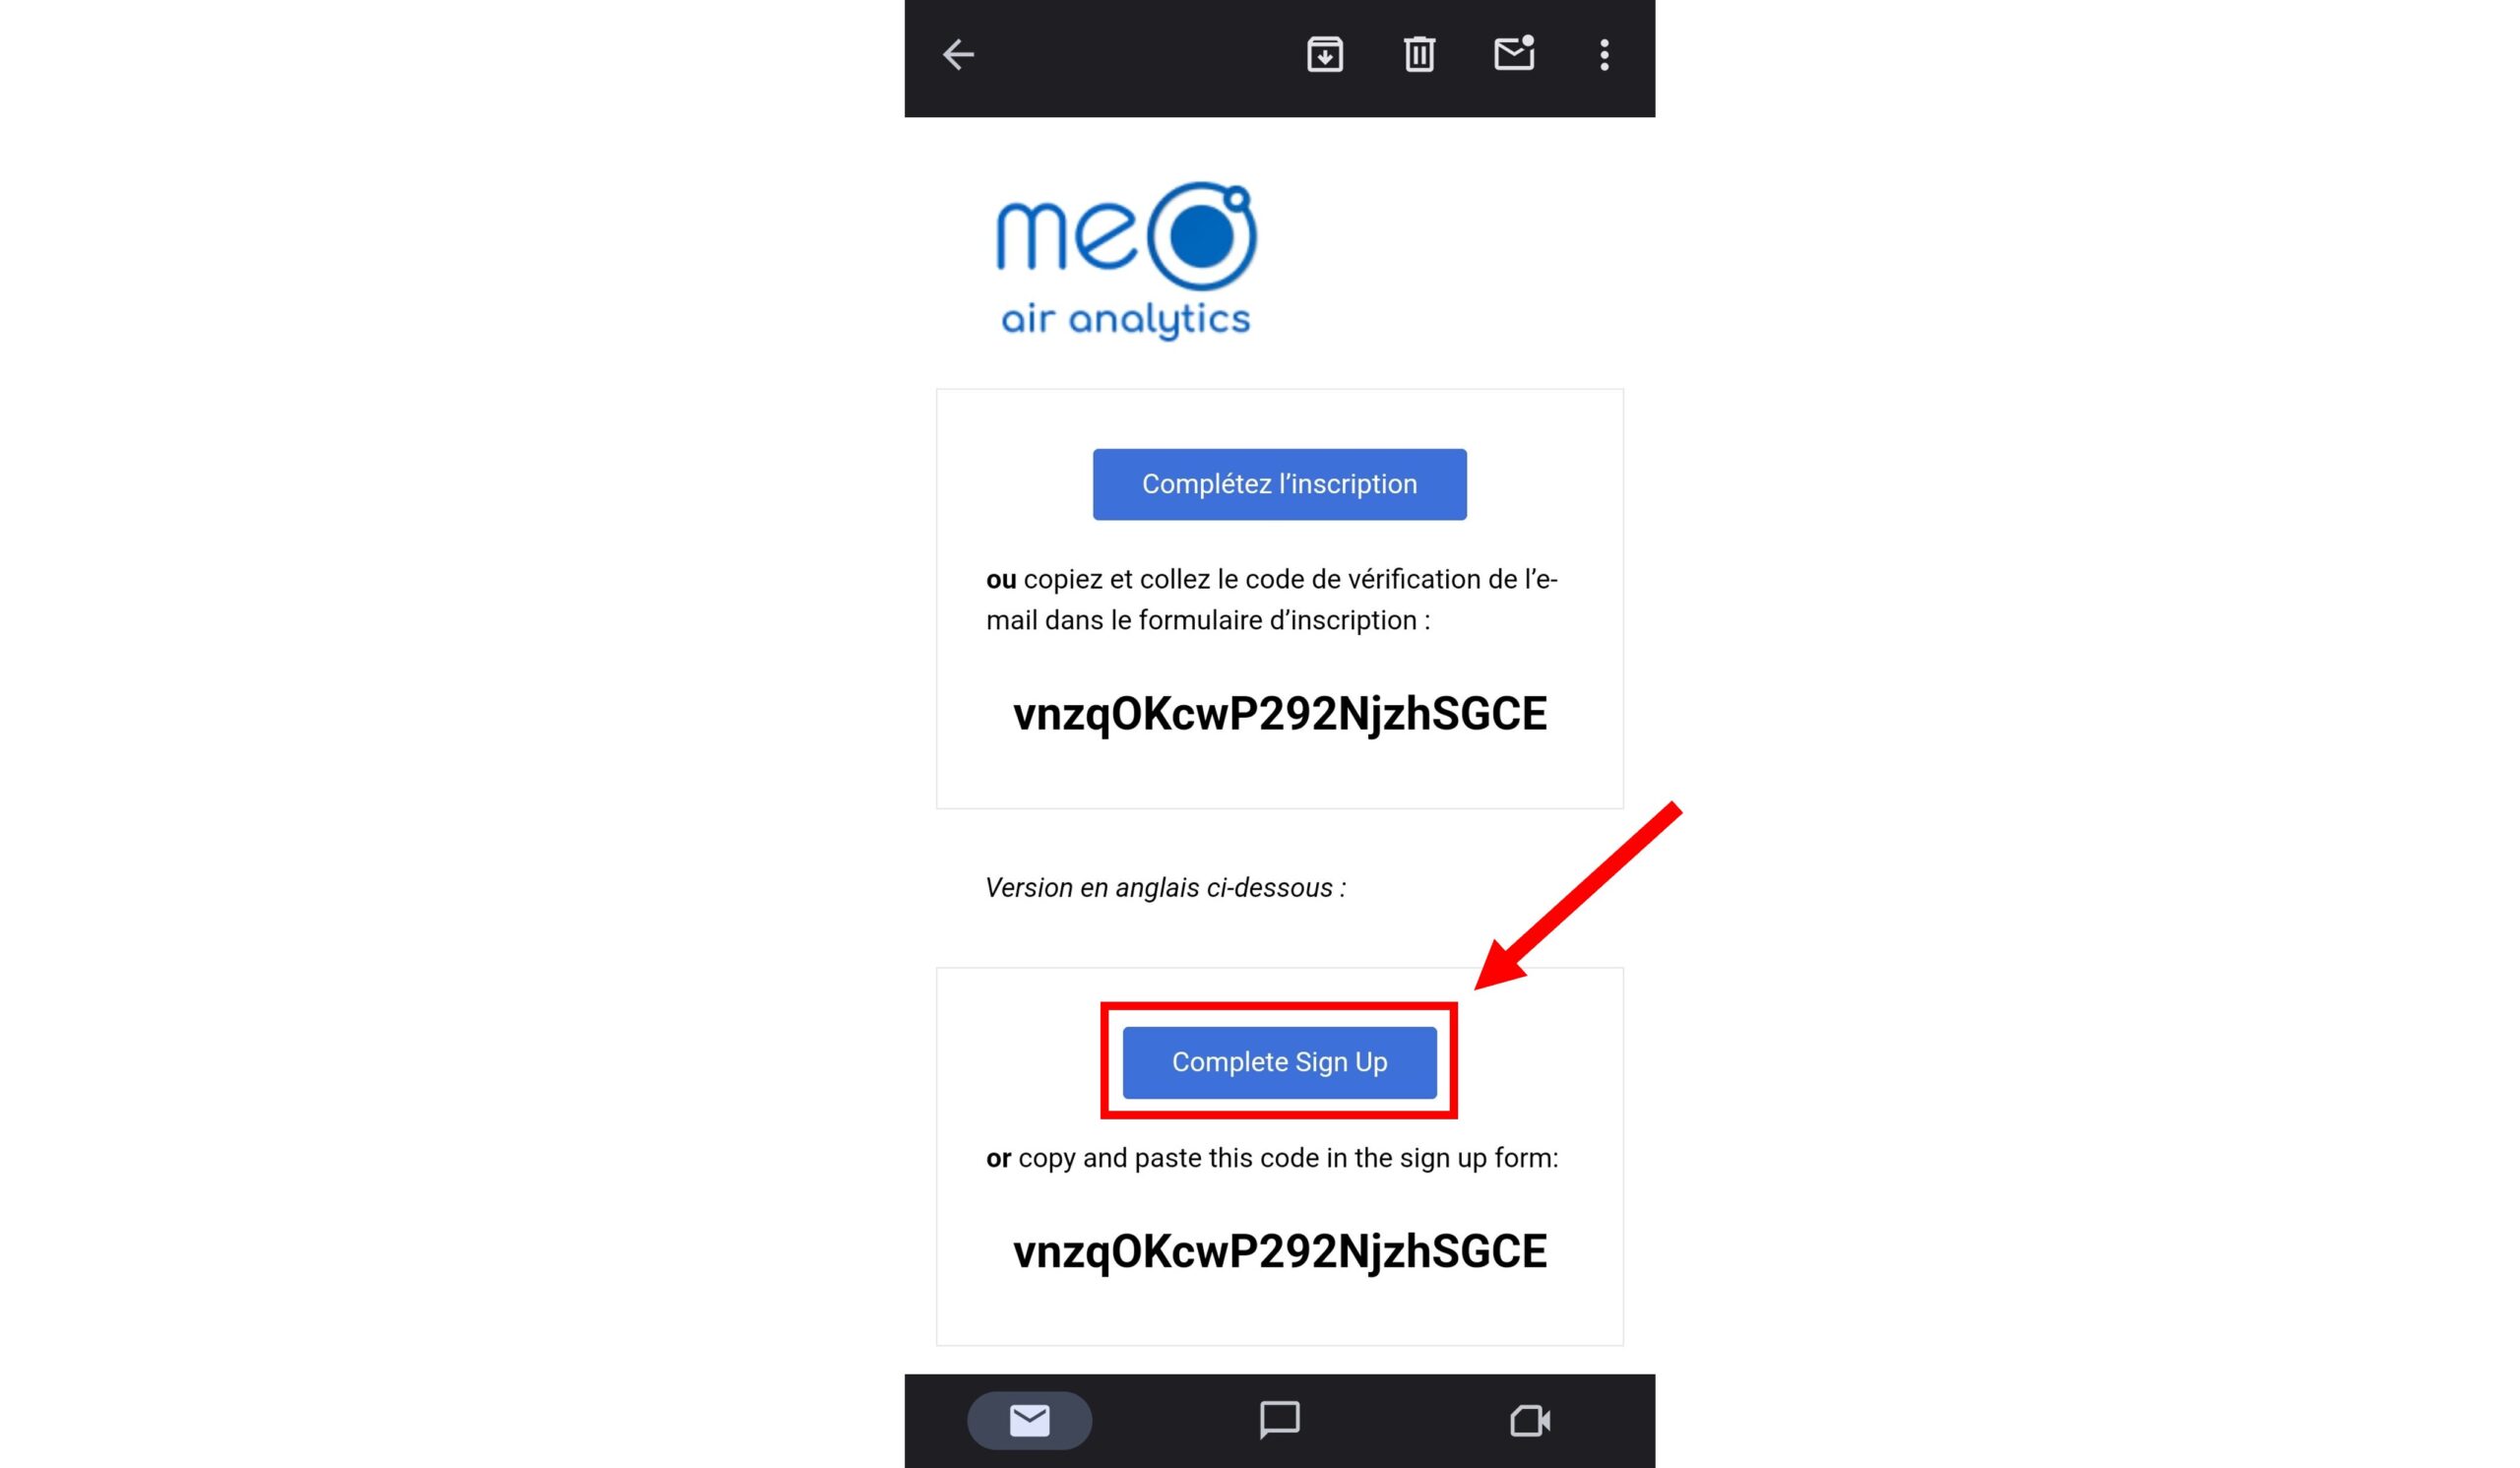 4. Check new email from meo and click on "Complete sign up"